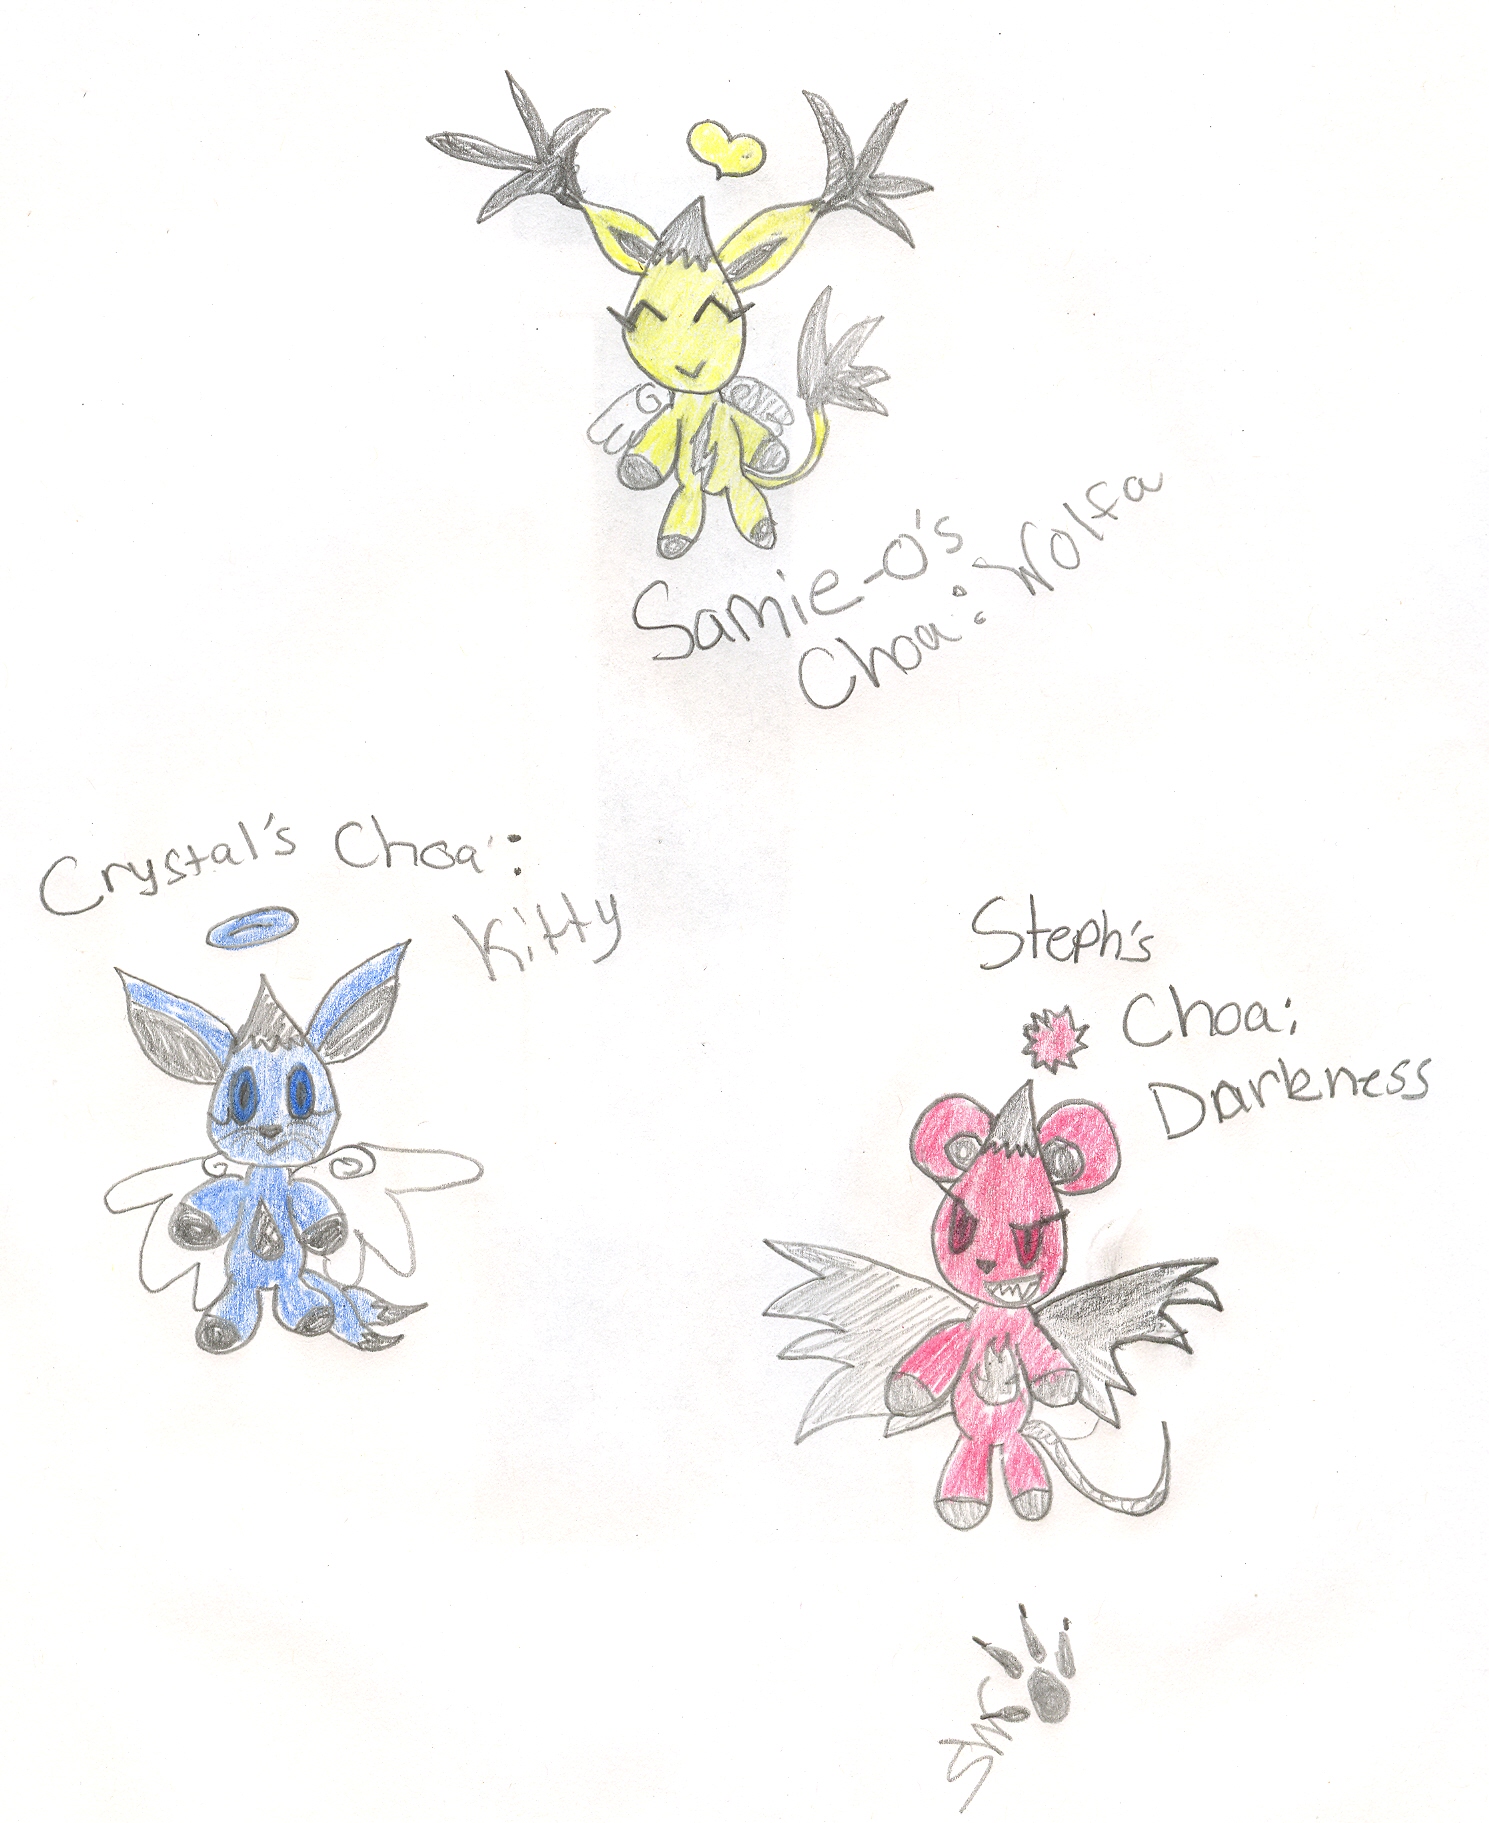 my teams new chao's by sam01